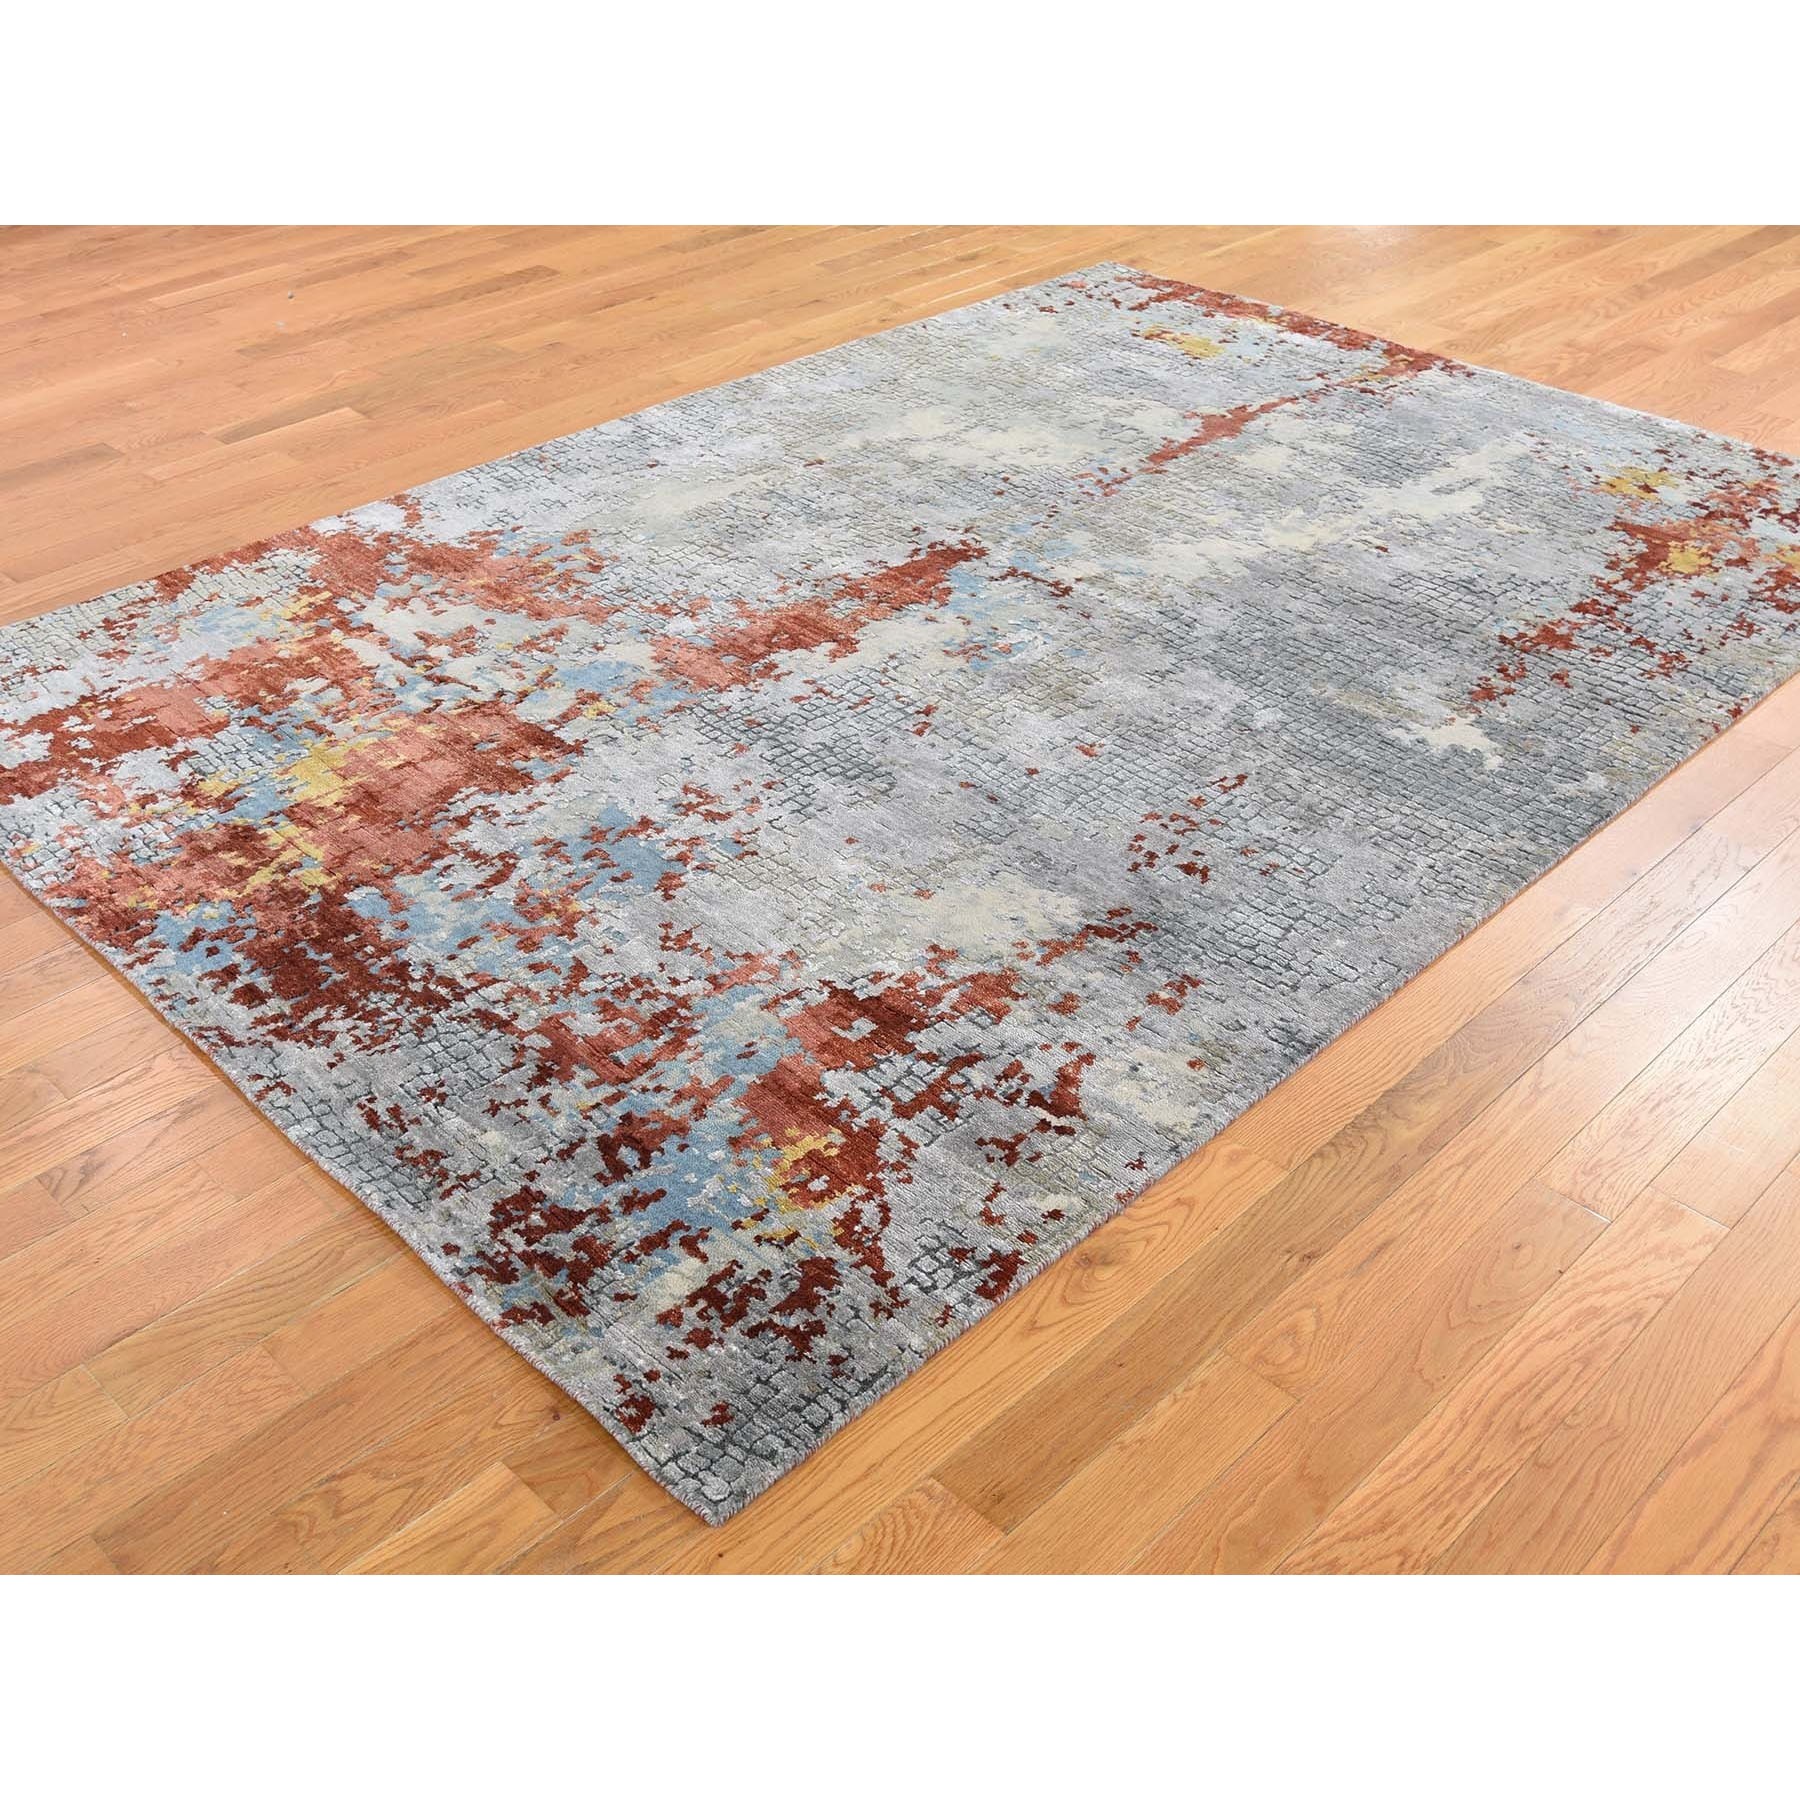 4-2 x6- Wool And Silk Abstract With Fire Mosaic Design Hand-Knotted Oriental Rug 